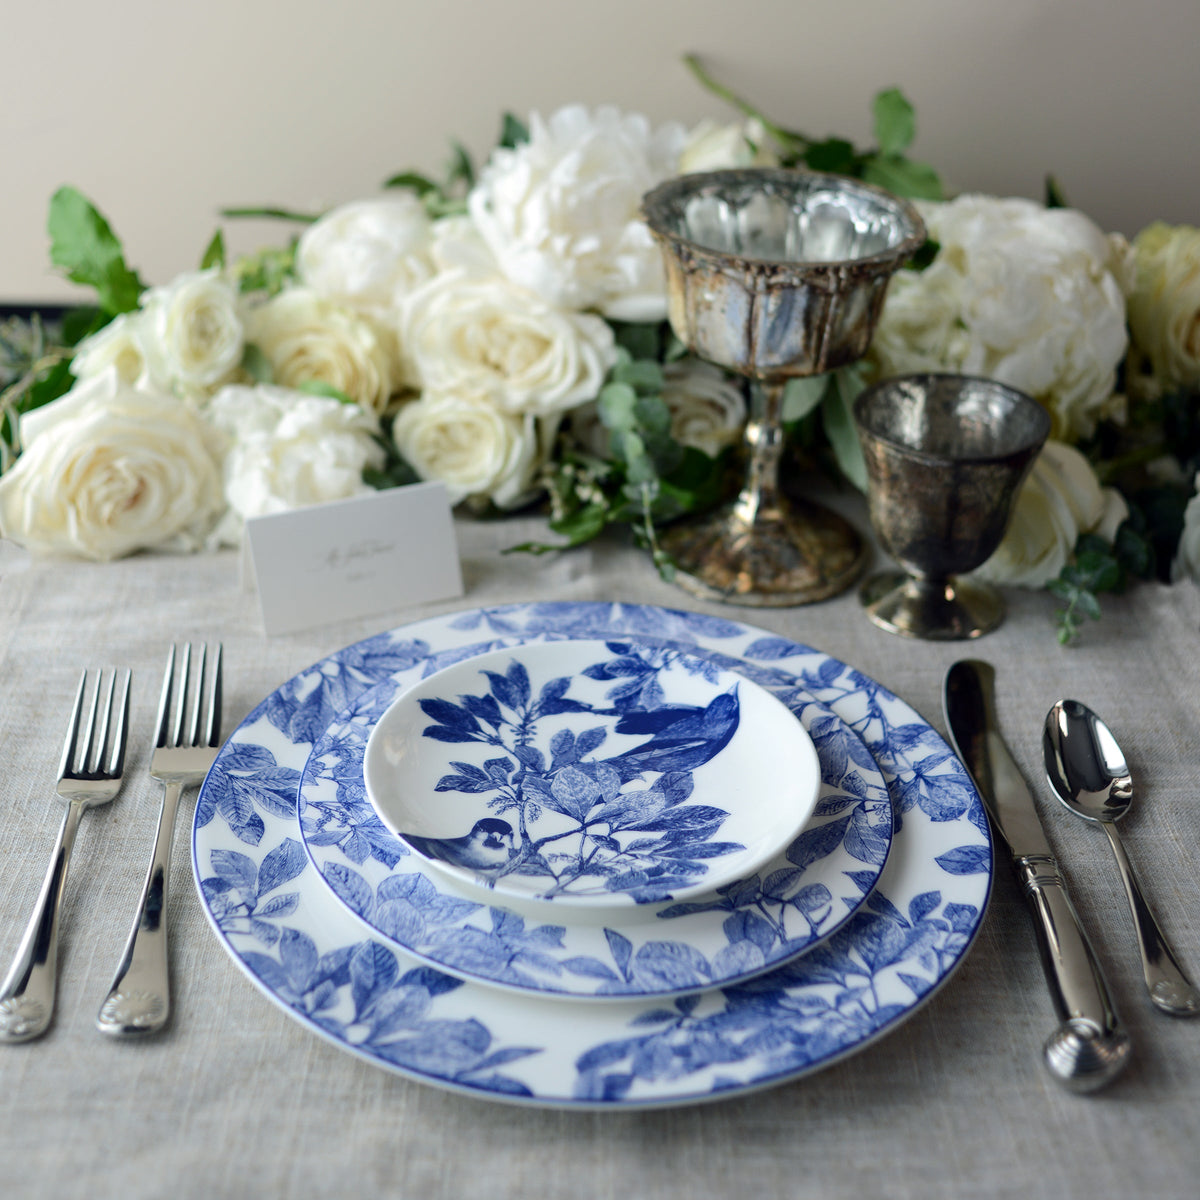 A romantic table with white roses and vintage silver is set with the blue and white porcelain Arbor place setting by Caskata.